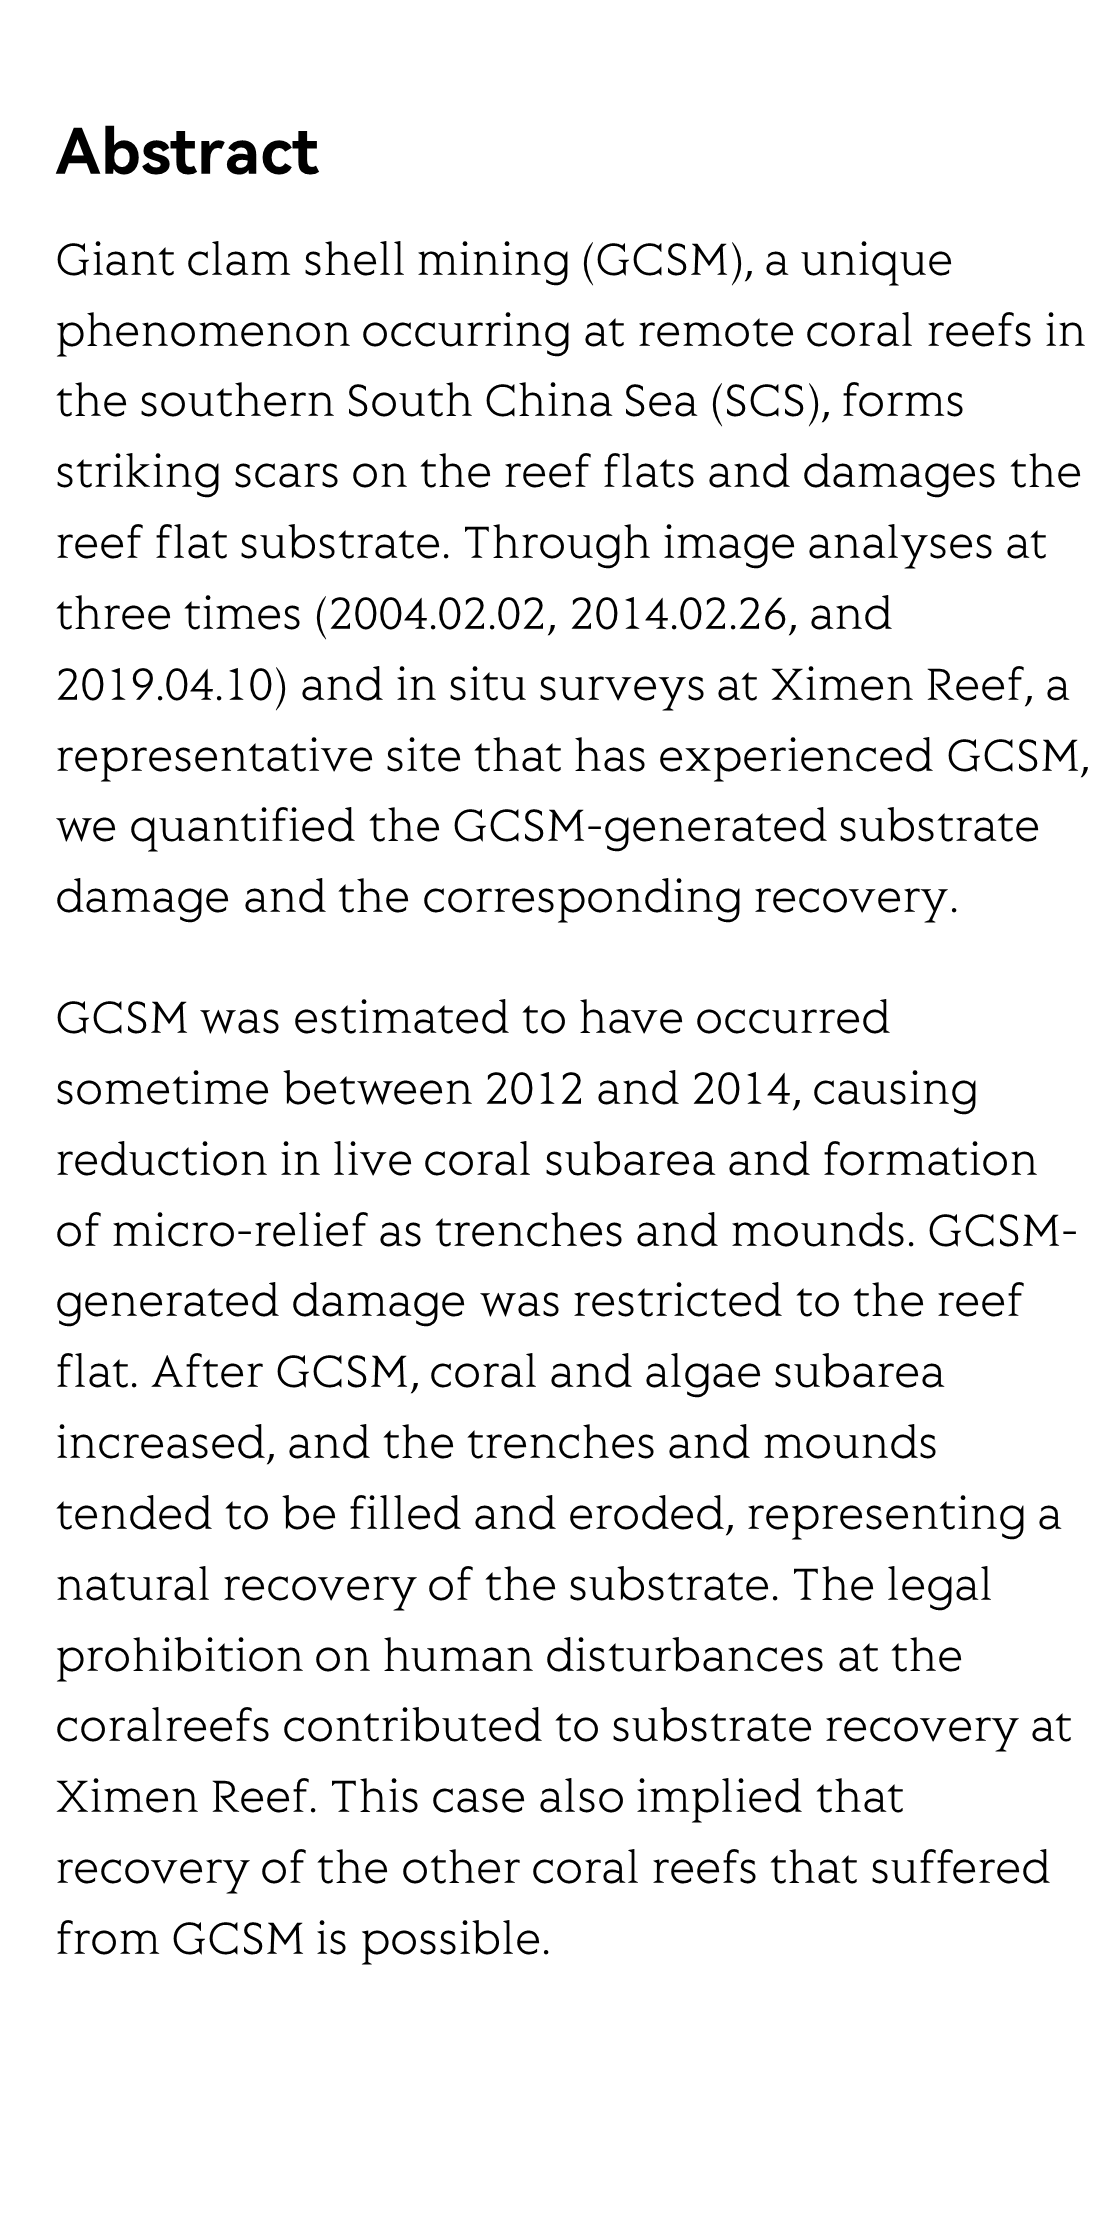 Substrate damage and recovery after giant clam shell mining at remote coral reefs in the southern South China Sea_2